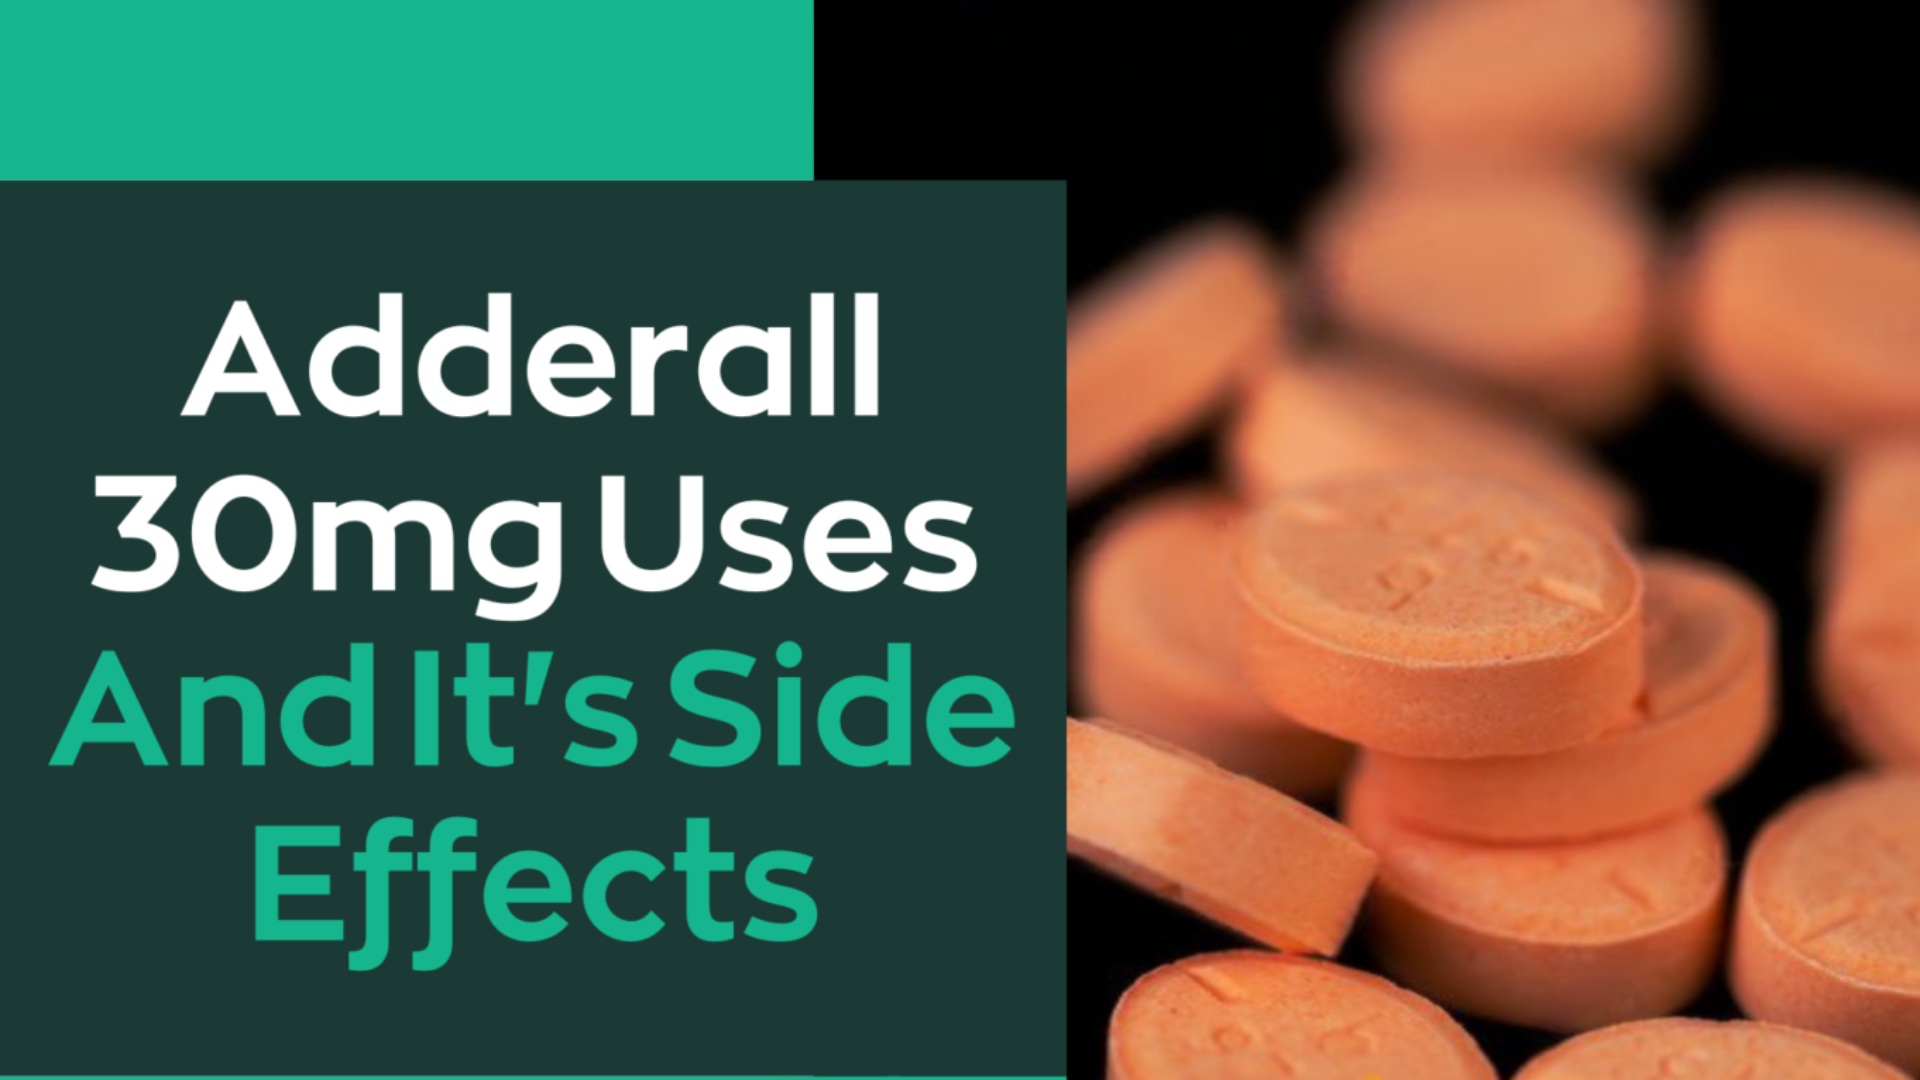 What is Adderall used For? 1